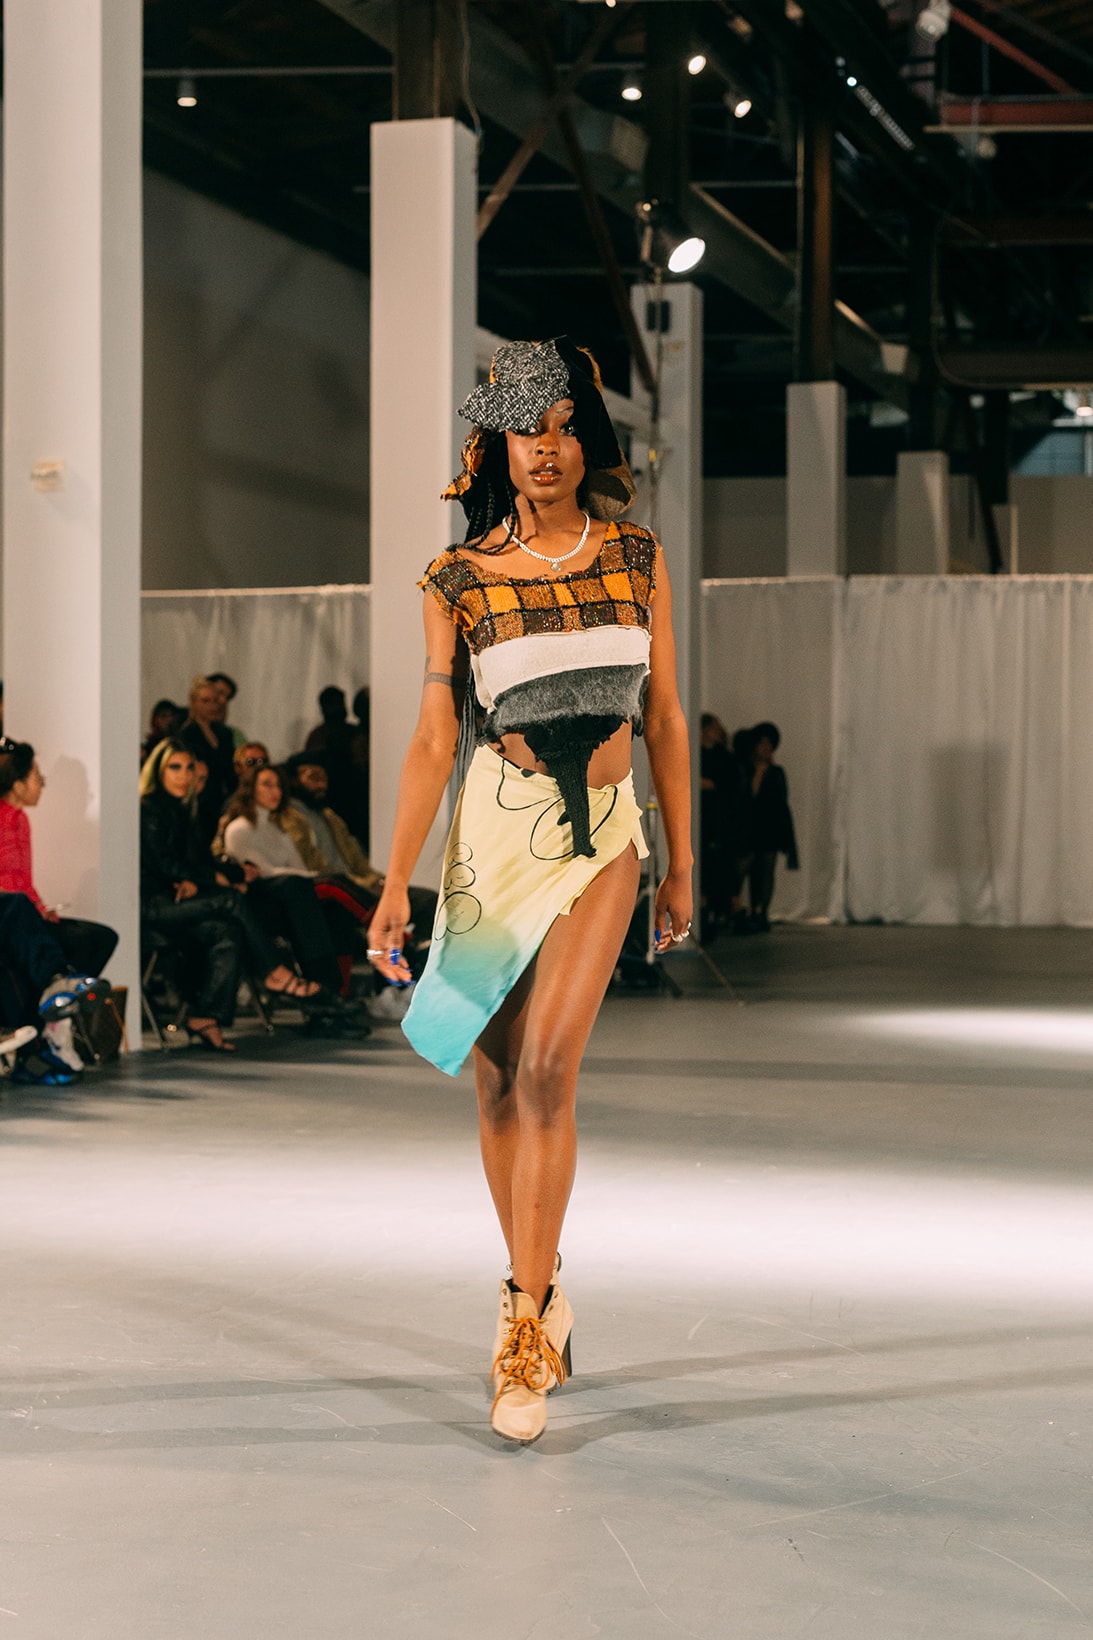 no sesso pierre davis arin hayes autumn randolph fall winter collection los angeles runway show skirt crop top